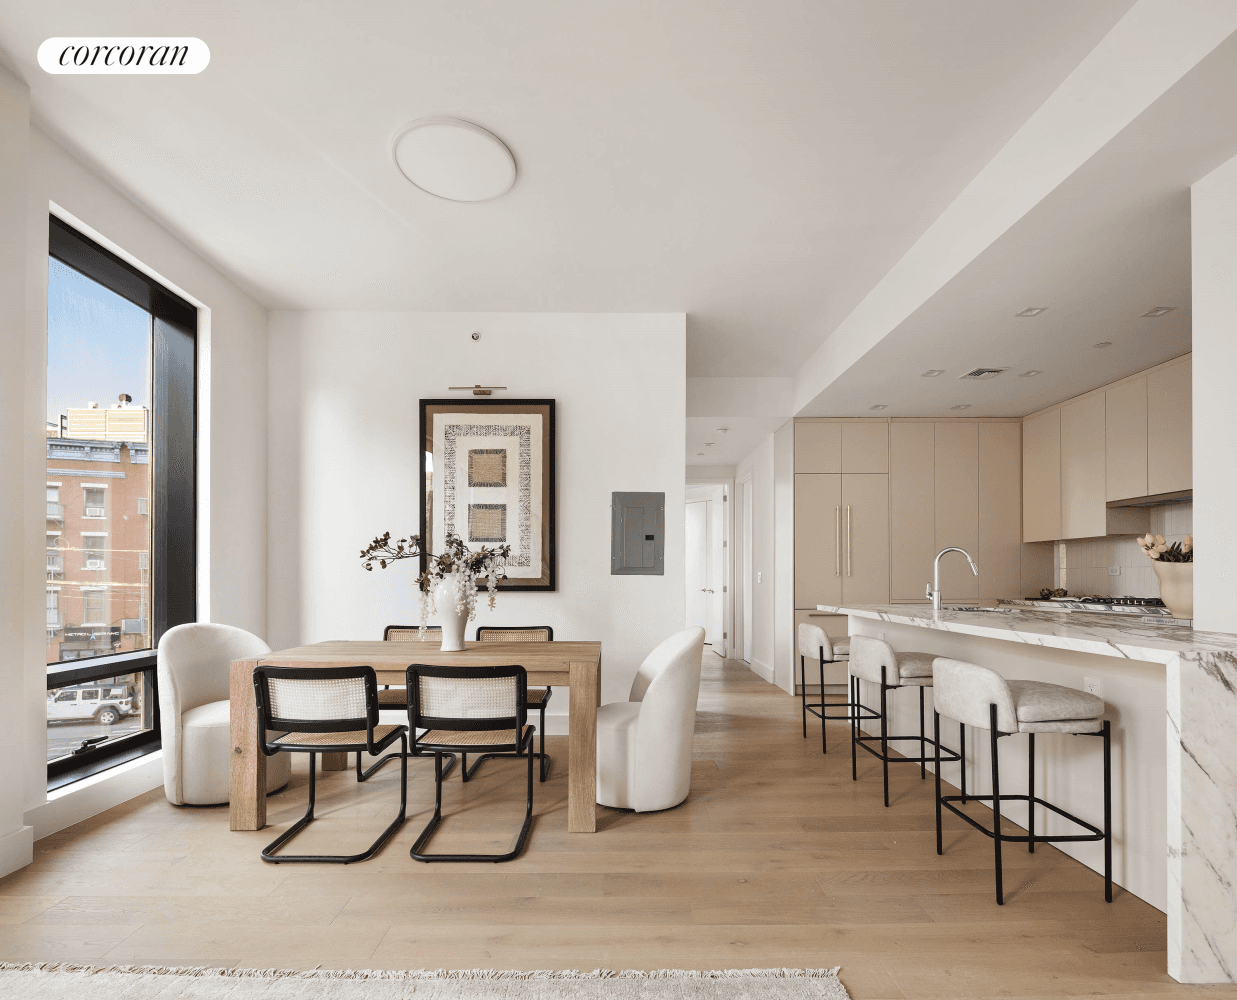 Leave behind the cookie cutter high rises and enjoy the intimacy of a brand new beautifully constructed one of kind New Development with no compromises on style and space.